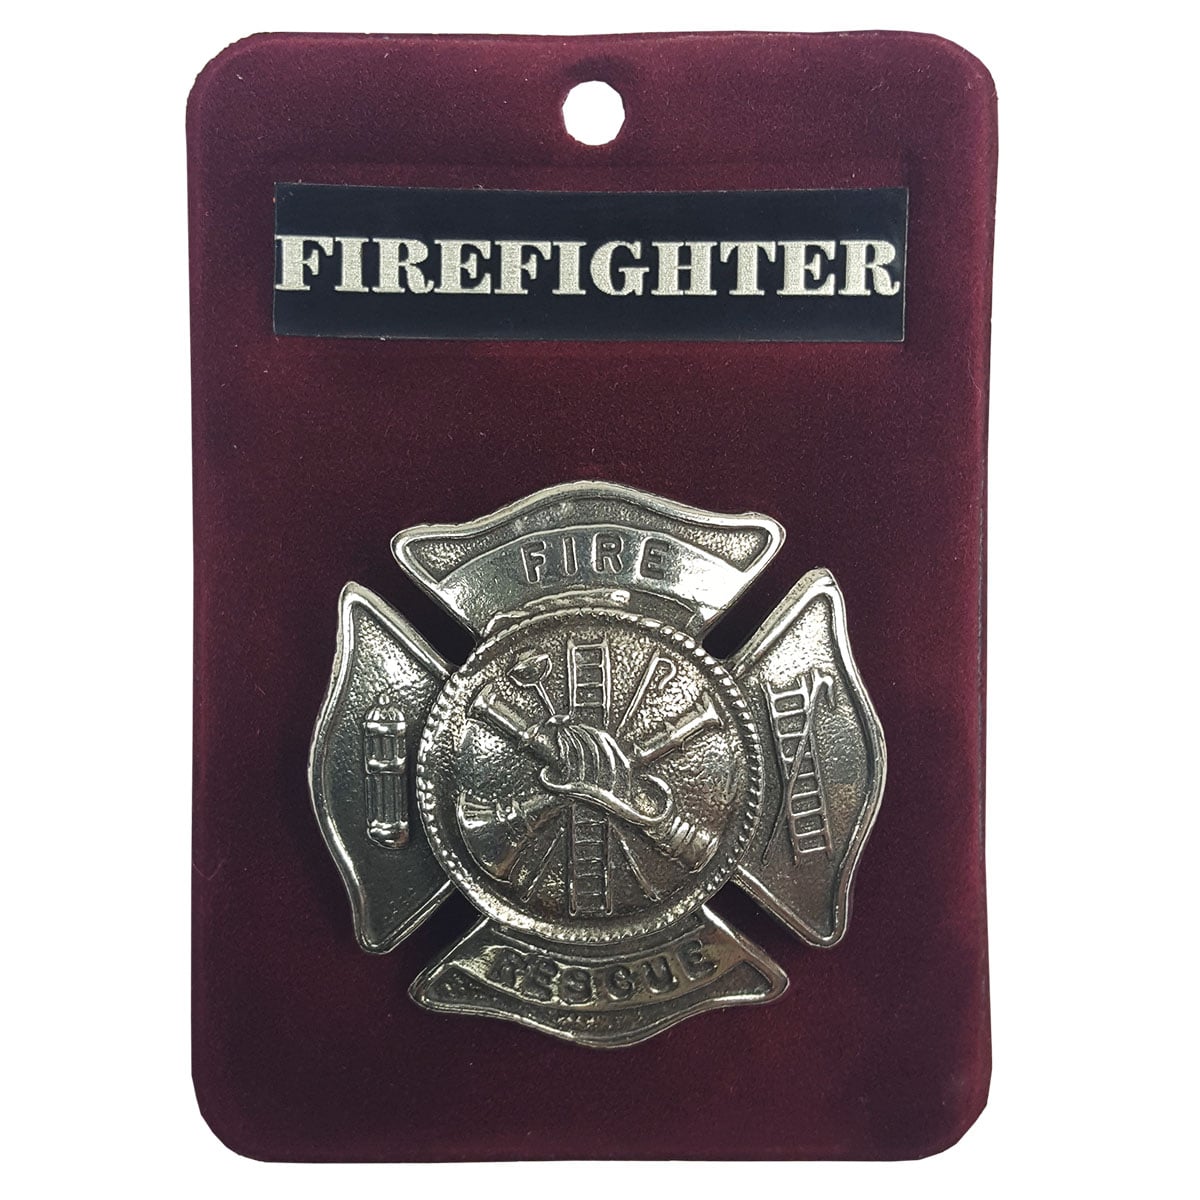 A Fire Rescue Firefighter Cap Badge/Brooch on a red background.